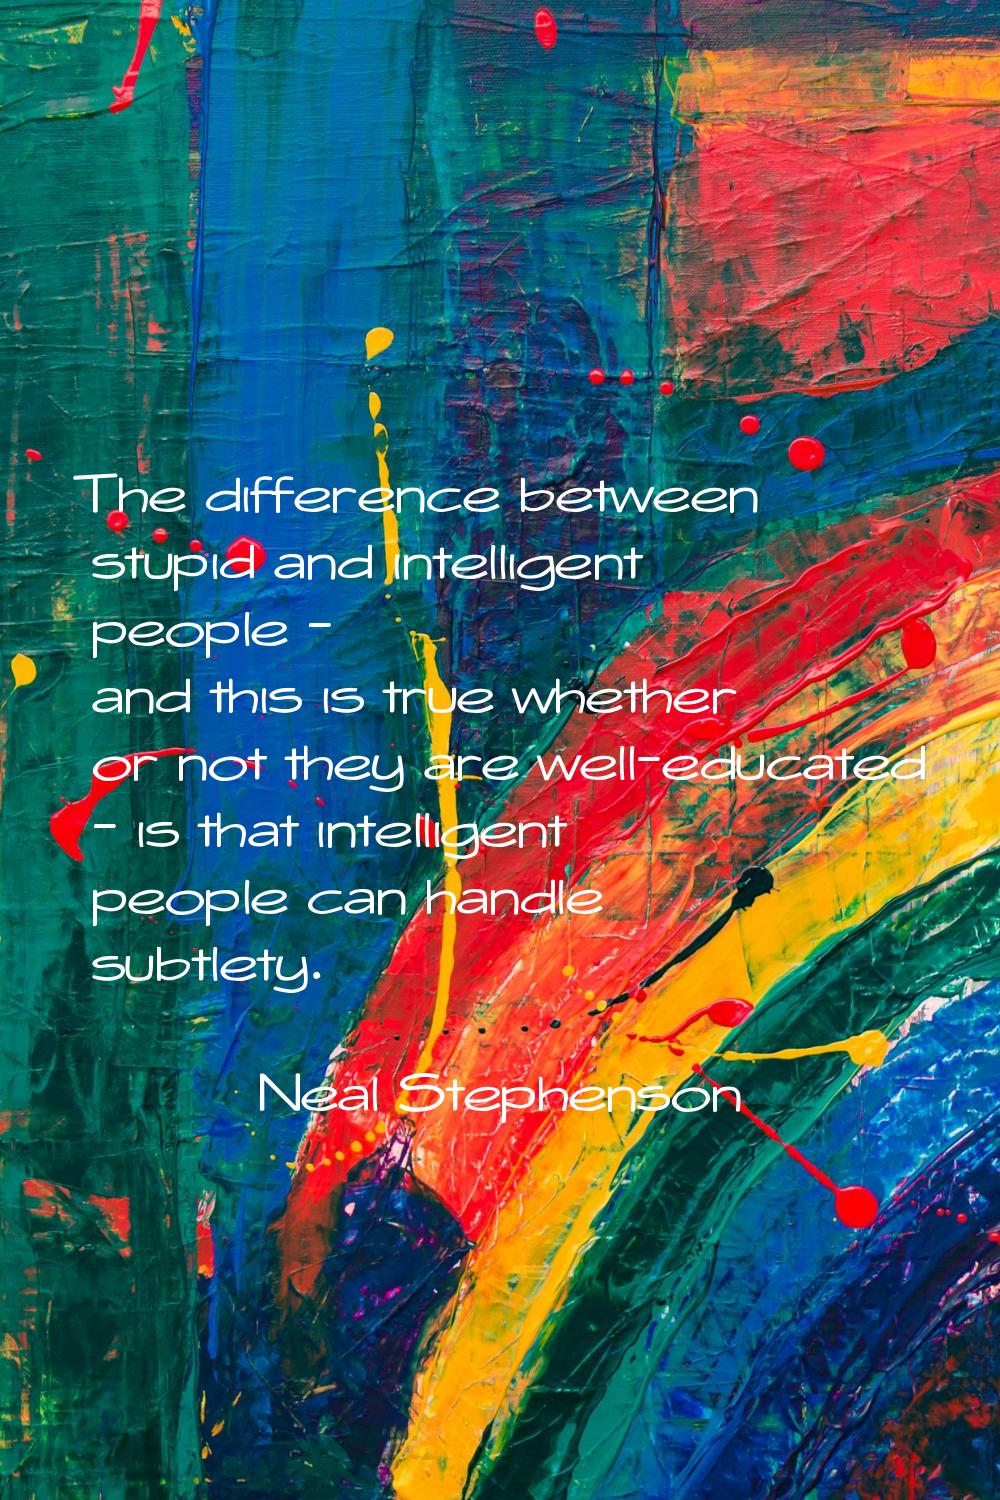 The difference between stupid and intelligent people - and this is true whether or not they are wel